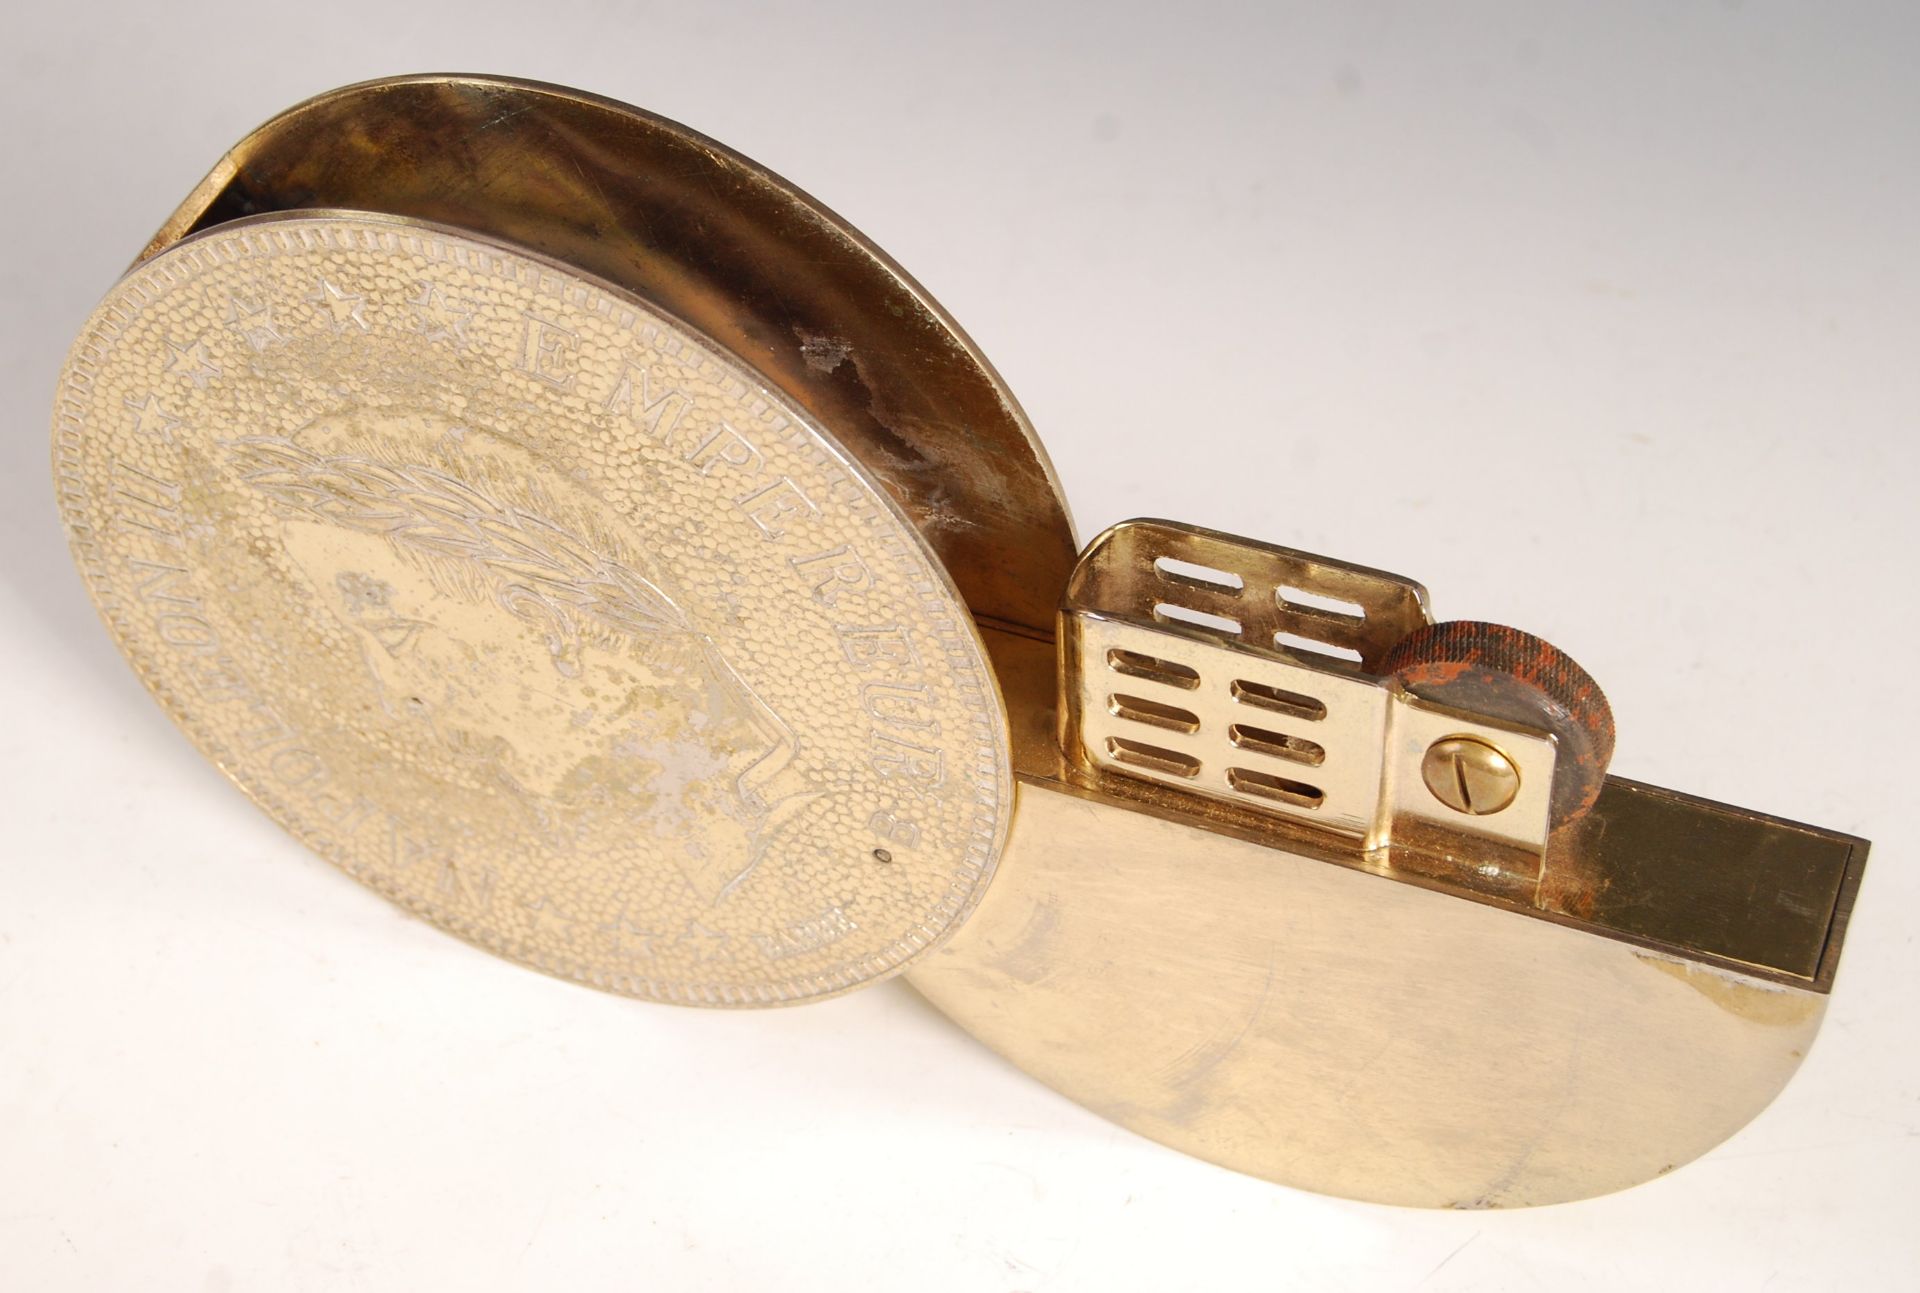 UNUSUAL RETRO VINTAGE TABLE LIGHTER IN THE FORM OF AN 1870 COIN - Image 4 of 4